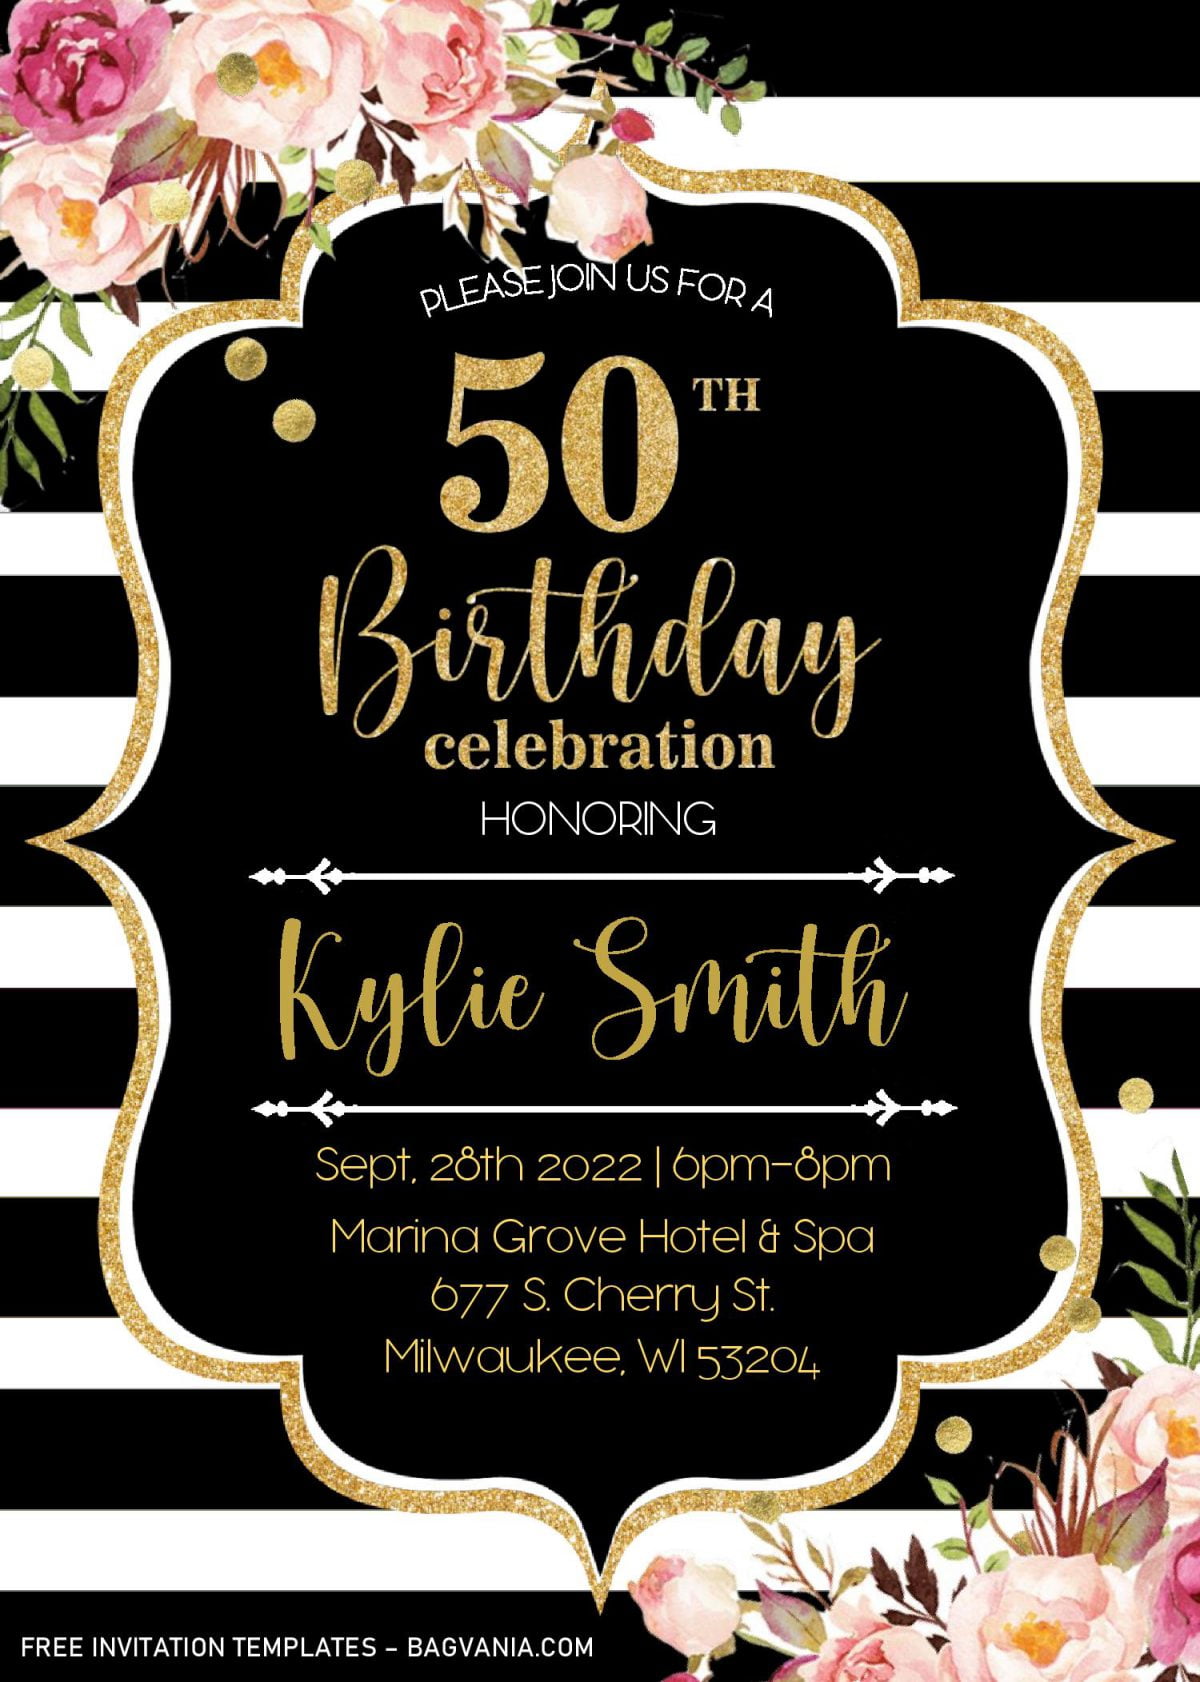 Black And Gold 50th Birthday Invitation Templates - Editable With MS Word and has Gold Bracket Text Frame